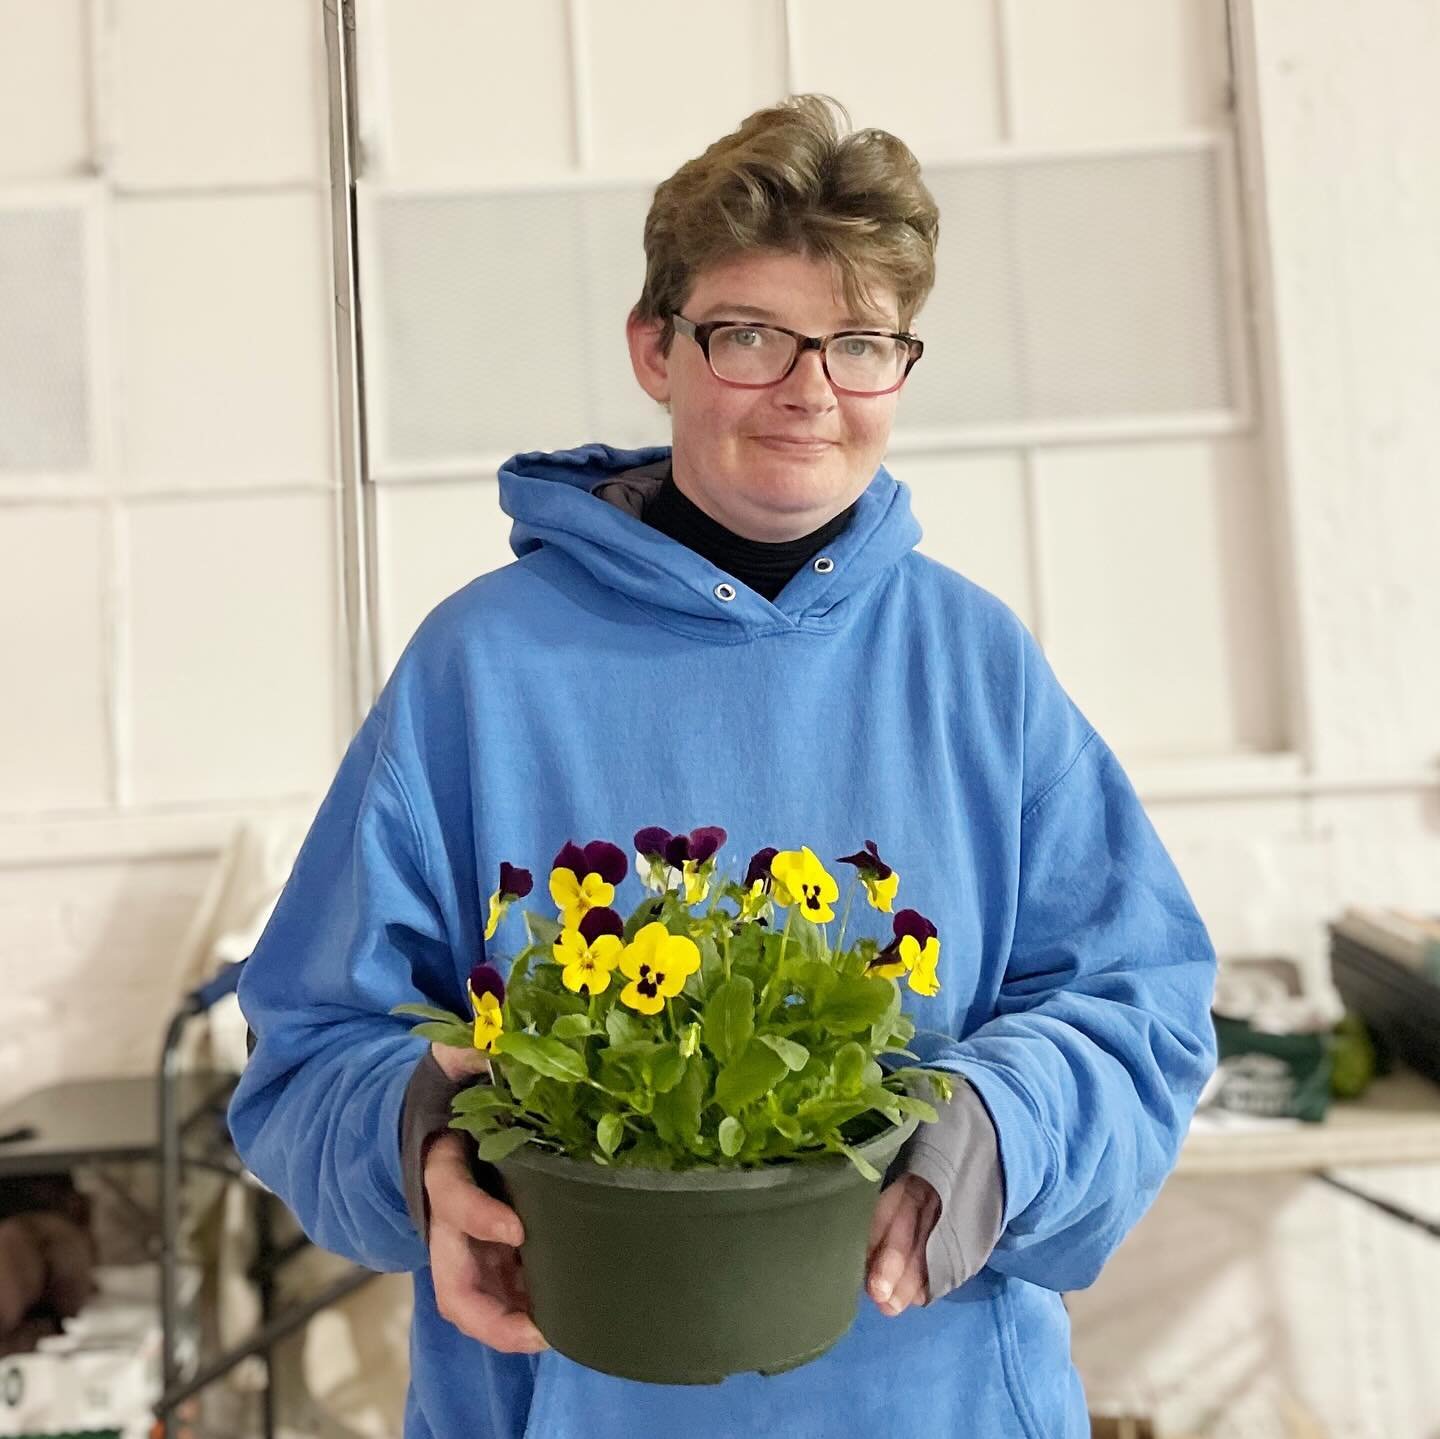 Human Farms &amp; Greenhouse will have plants for sale on Saturday, May 11th at our Mother&rsquo;s Day Market! Enjoy pansies, marigolds, petunias, and more. Stop on by at 210 Walnut Street from 10am to 2pm to shop flowers and more! #lockportny #niaga